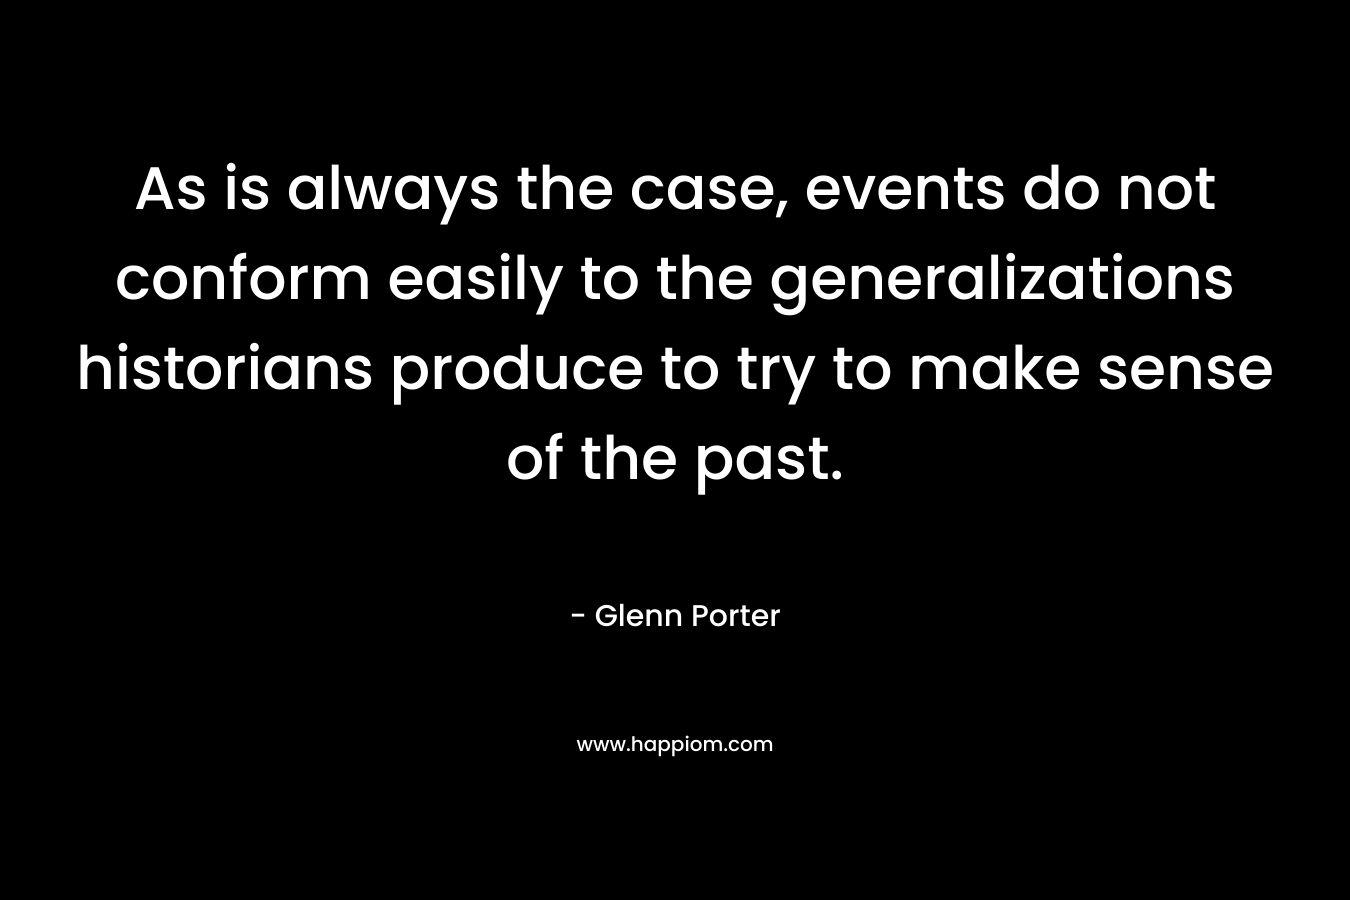 As is always the case, events do not conform easily to the generalizations historians produce to try to make sense of the past. – Glenn Porter